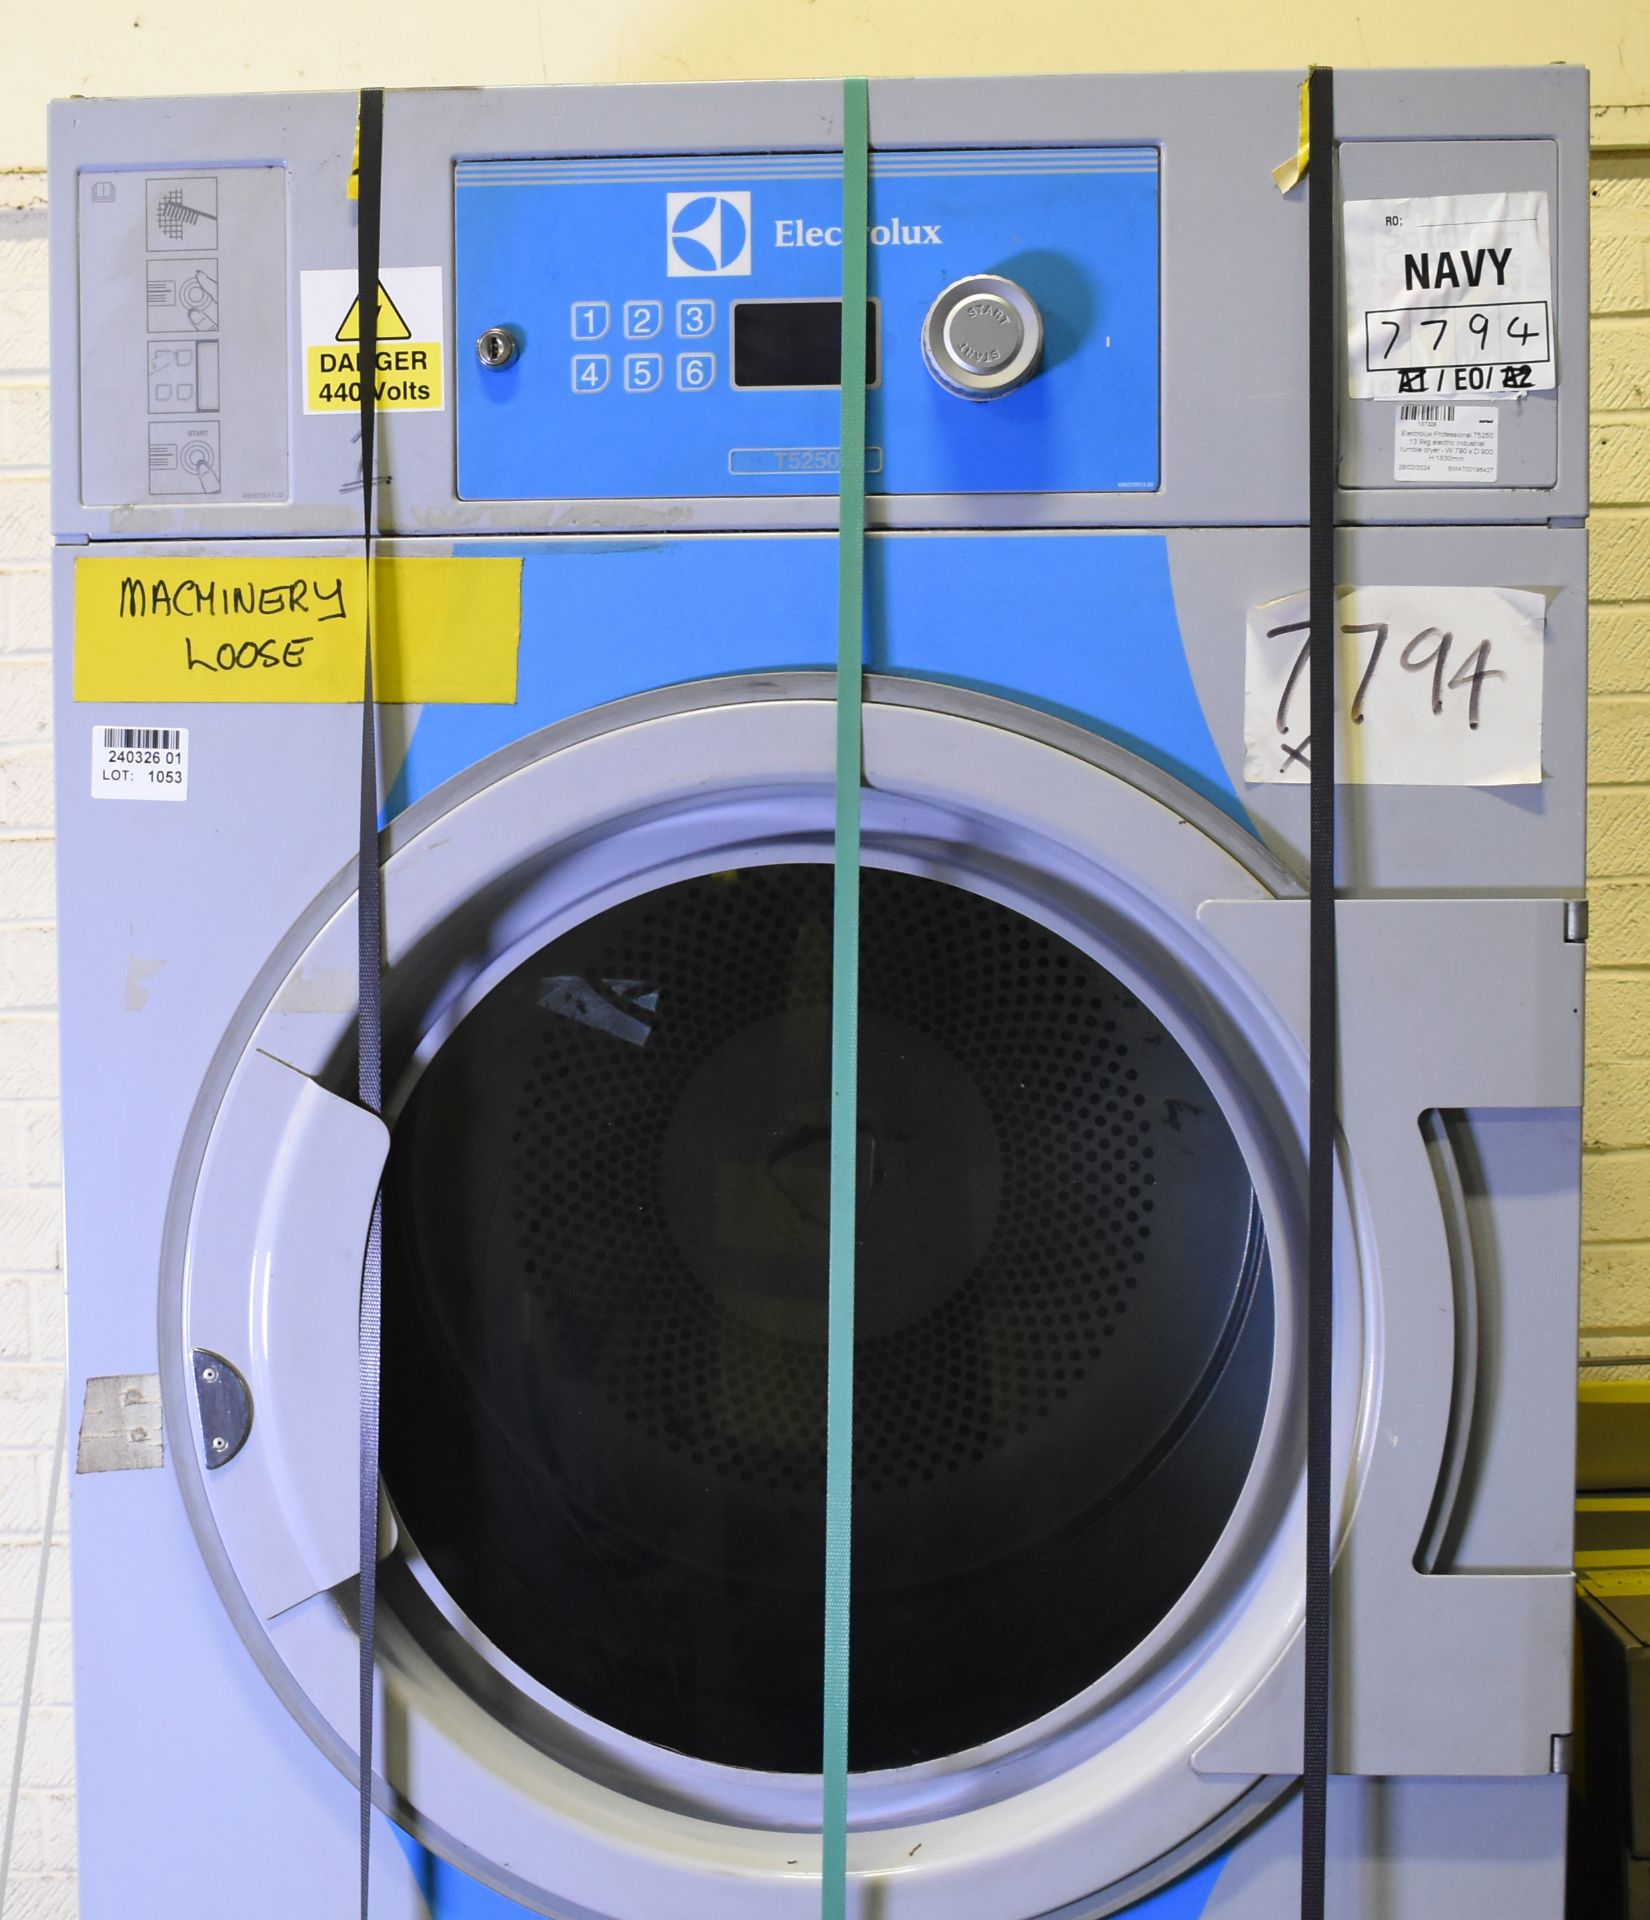 Electrolux Professional T5250 13.9kg electric industrial tumble dryer - W 790 x D 900 x H 1830mm - Image 3 of 7